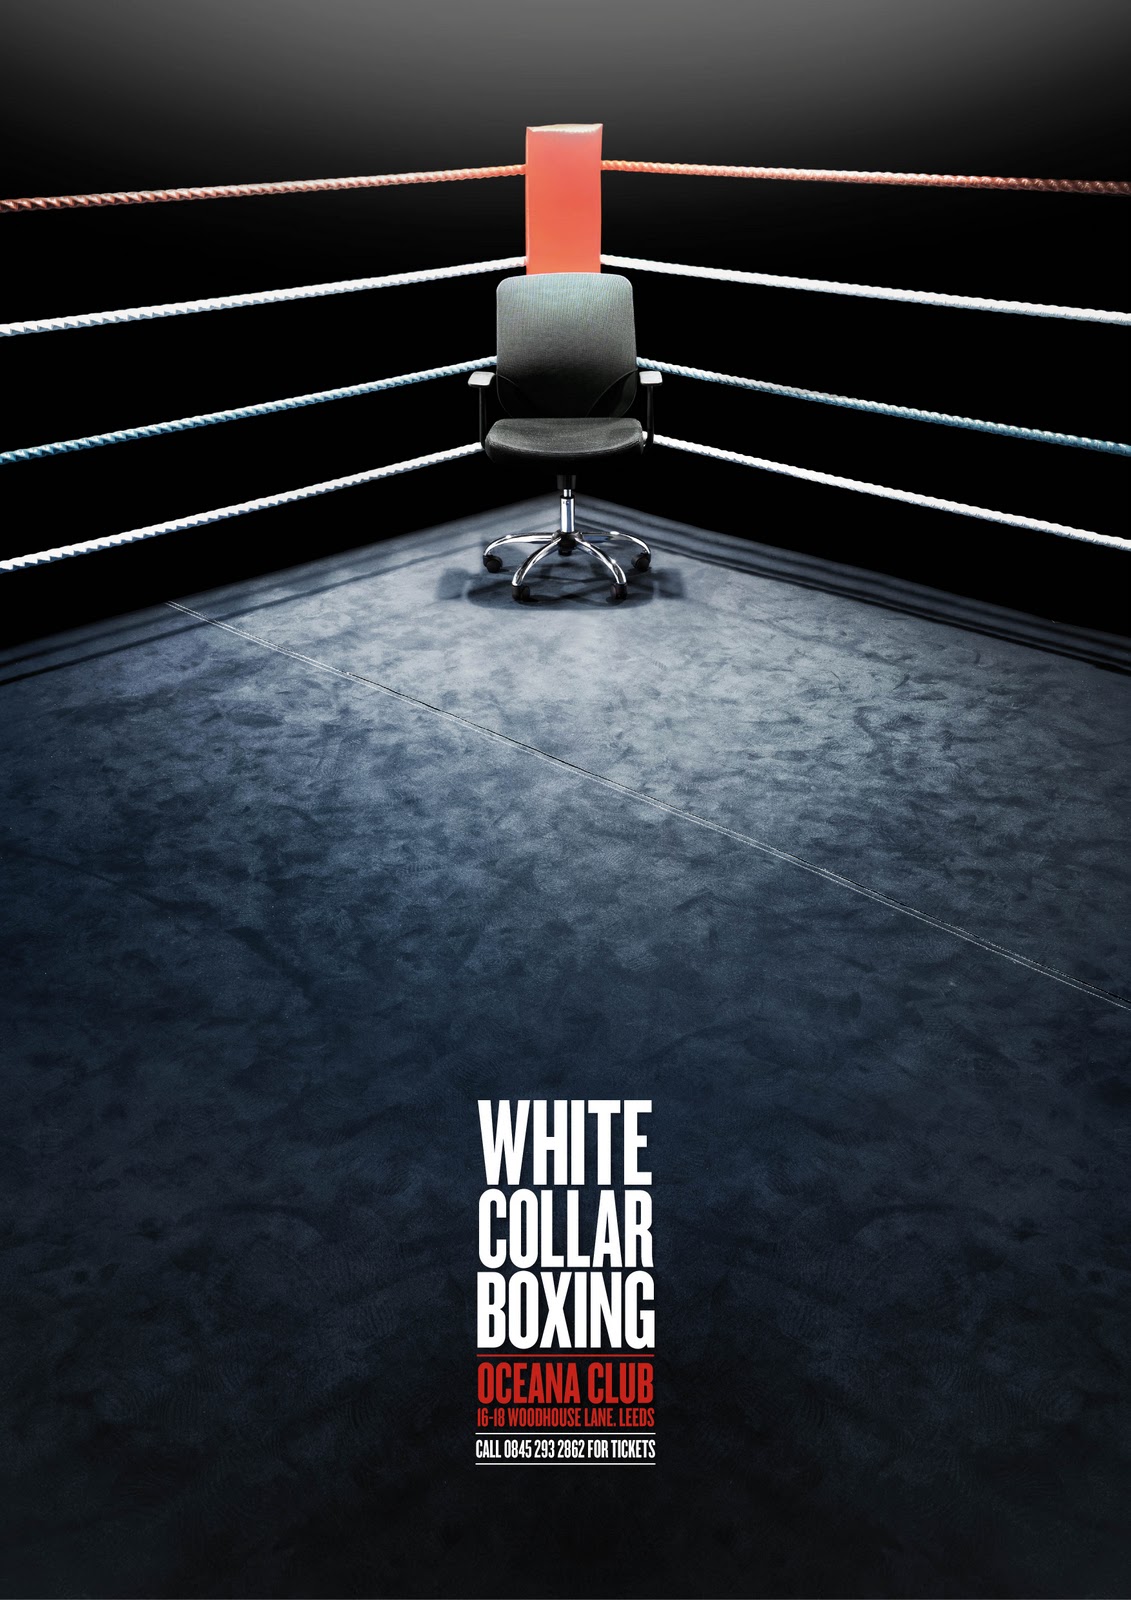 Midland cream awards Winning image for White-collar boxing commissioned by McCanns Central